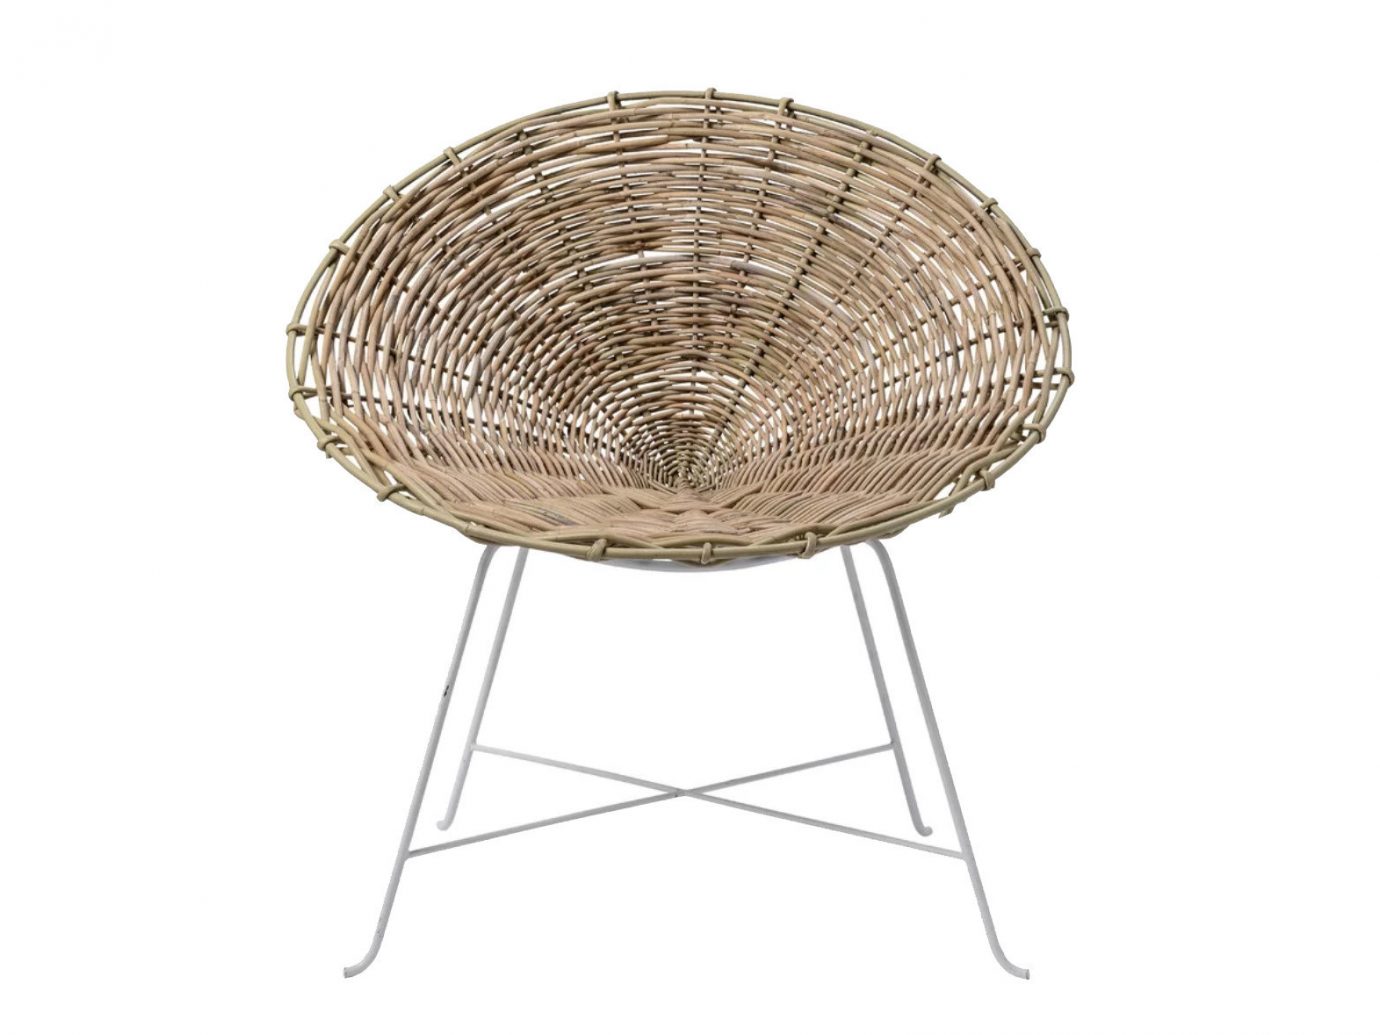 Amsterdam Style + Design The Netherlands Travel Shop basket wicker furniture container table product design product storage basket chair